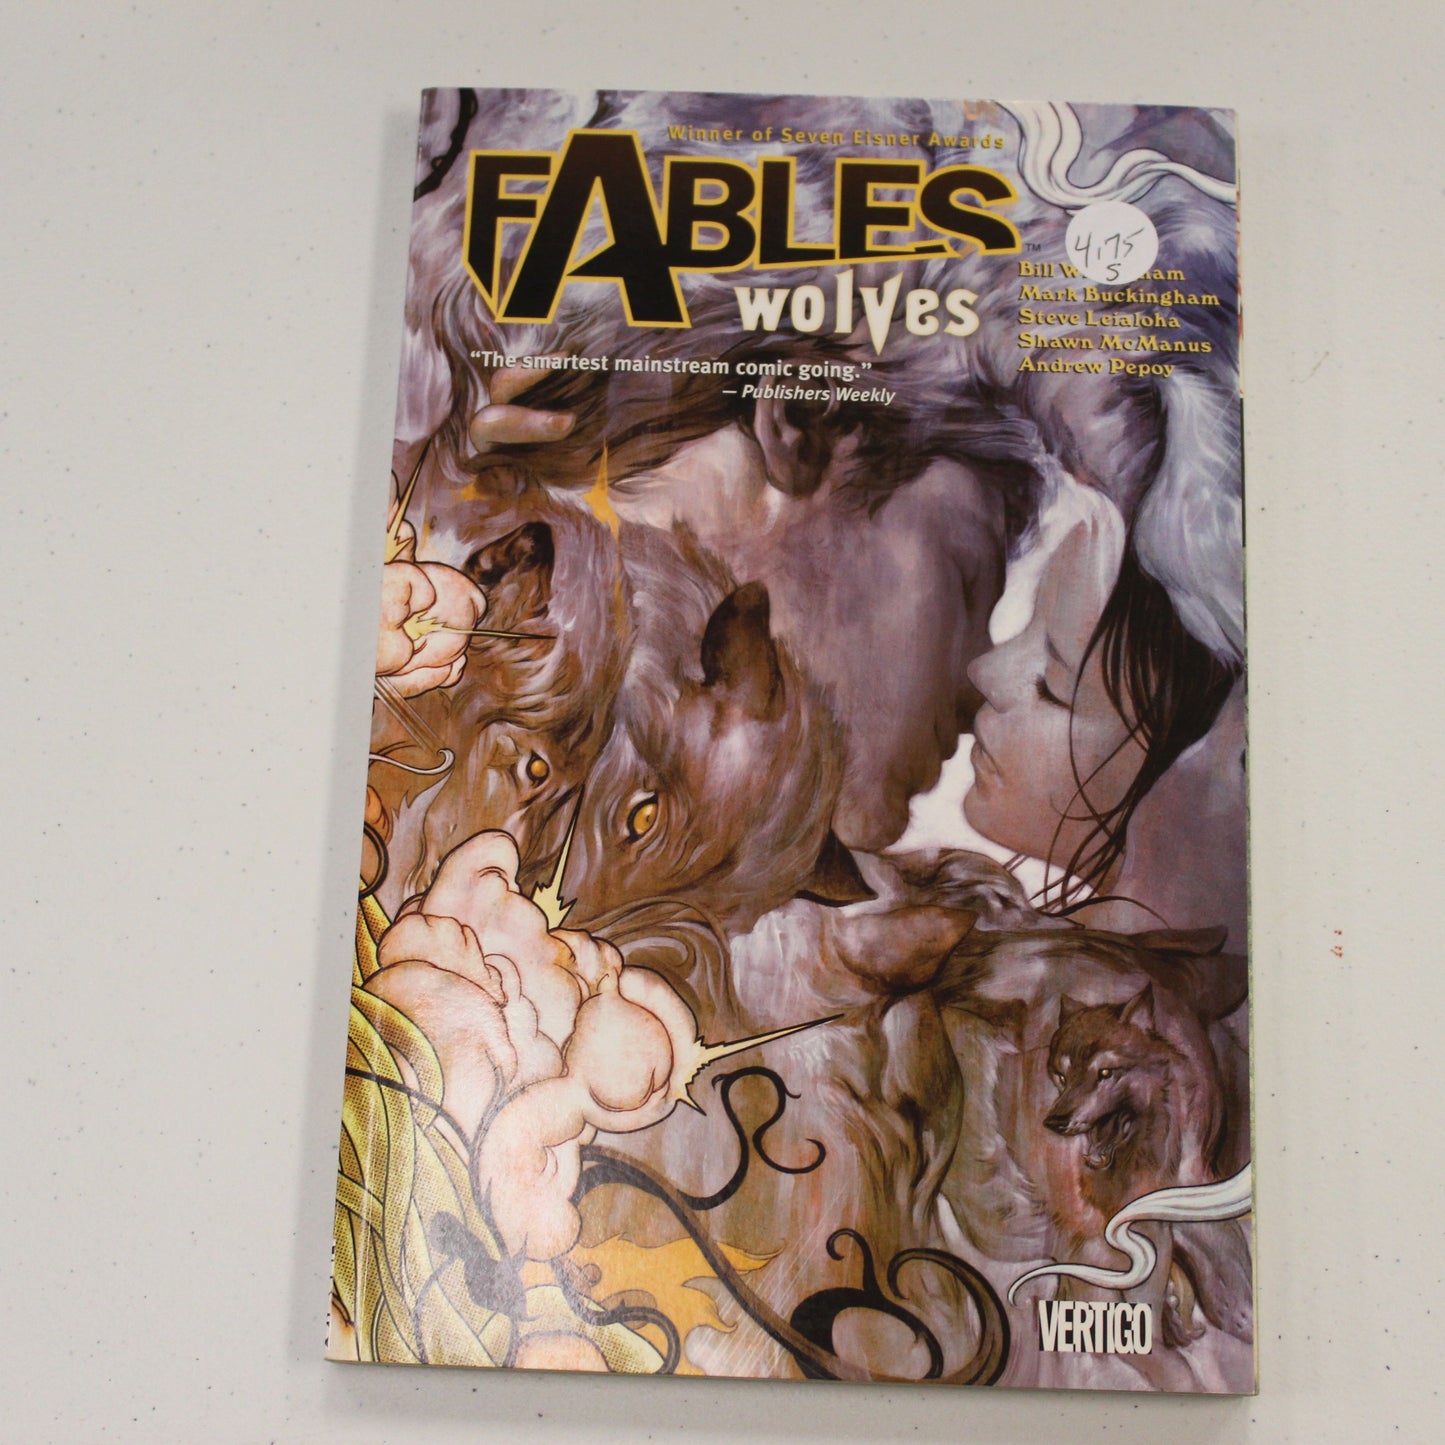 FABLES: WOLVES